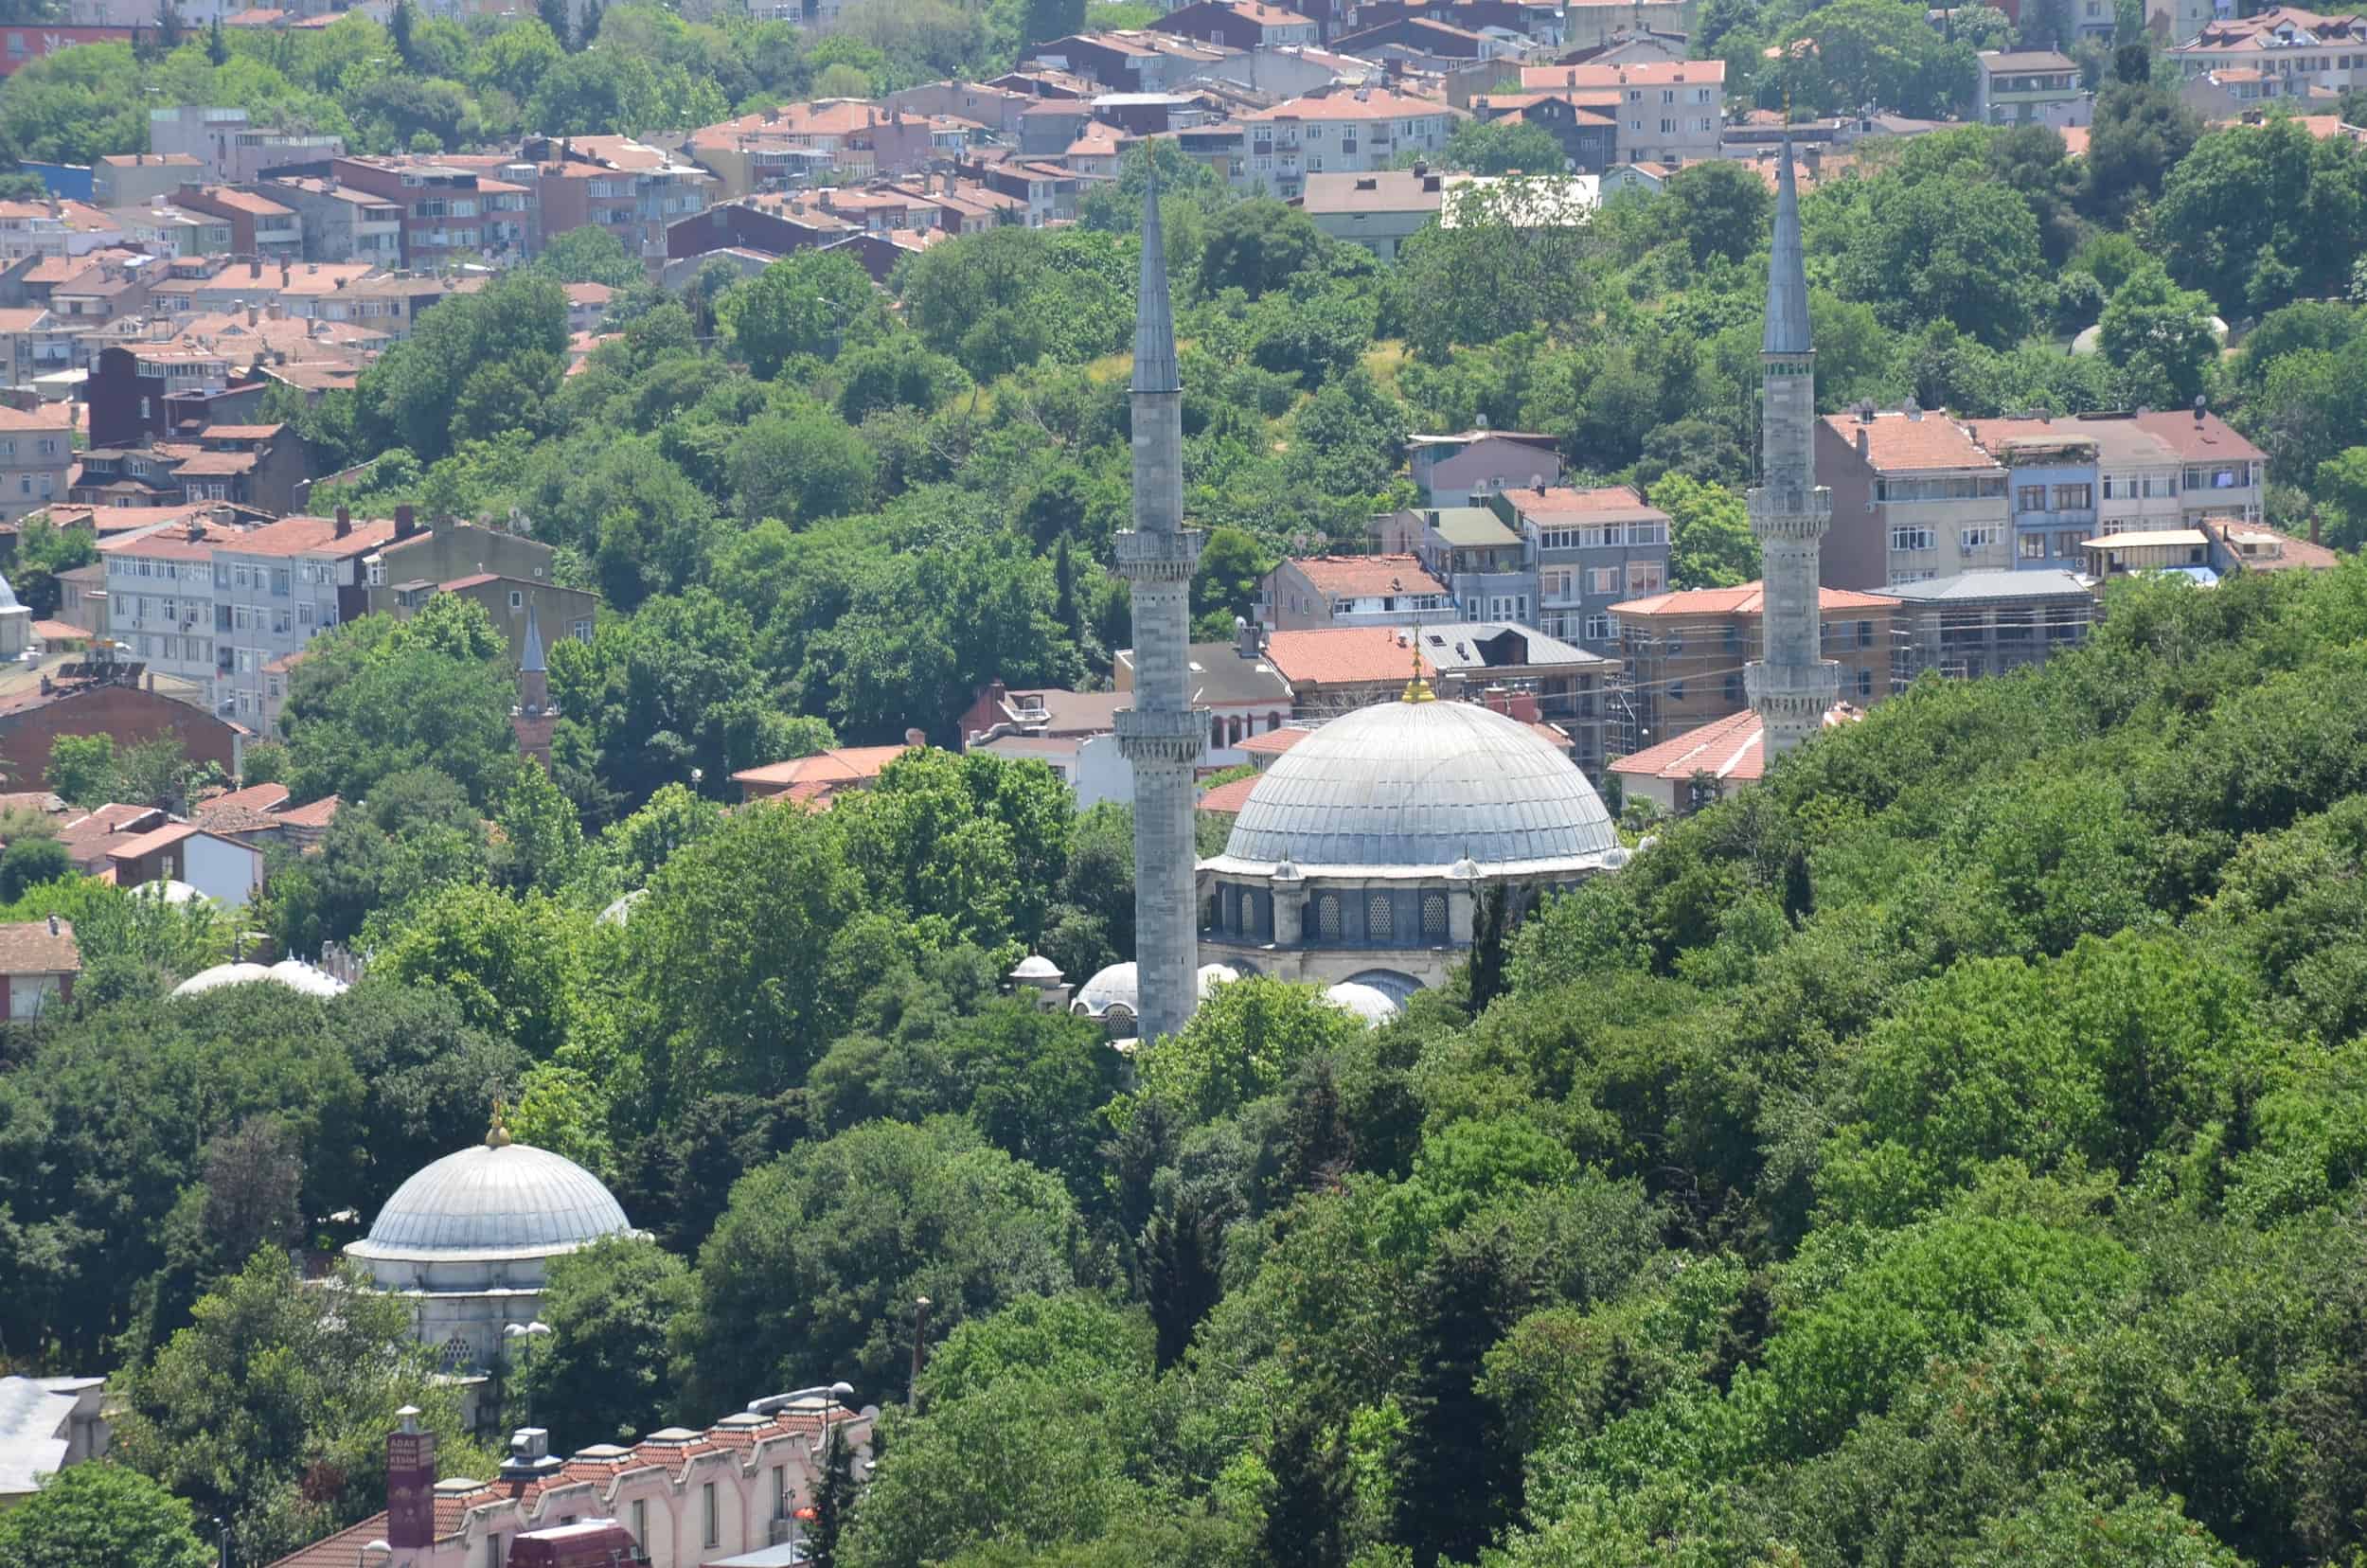 Looking down at the Eyüp Sultan Mosque